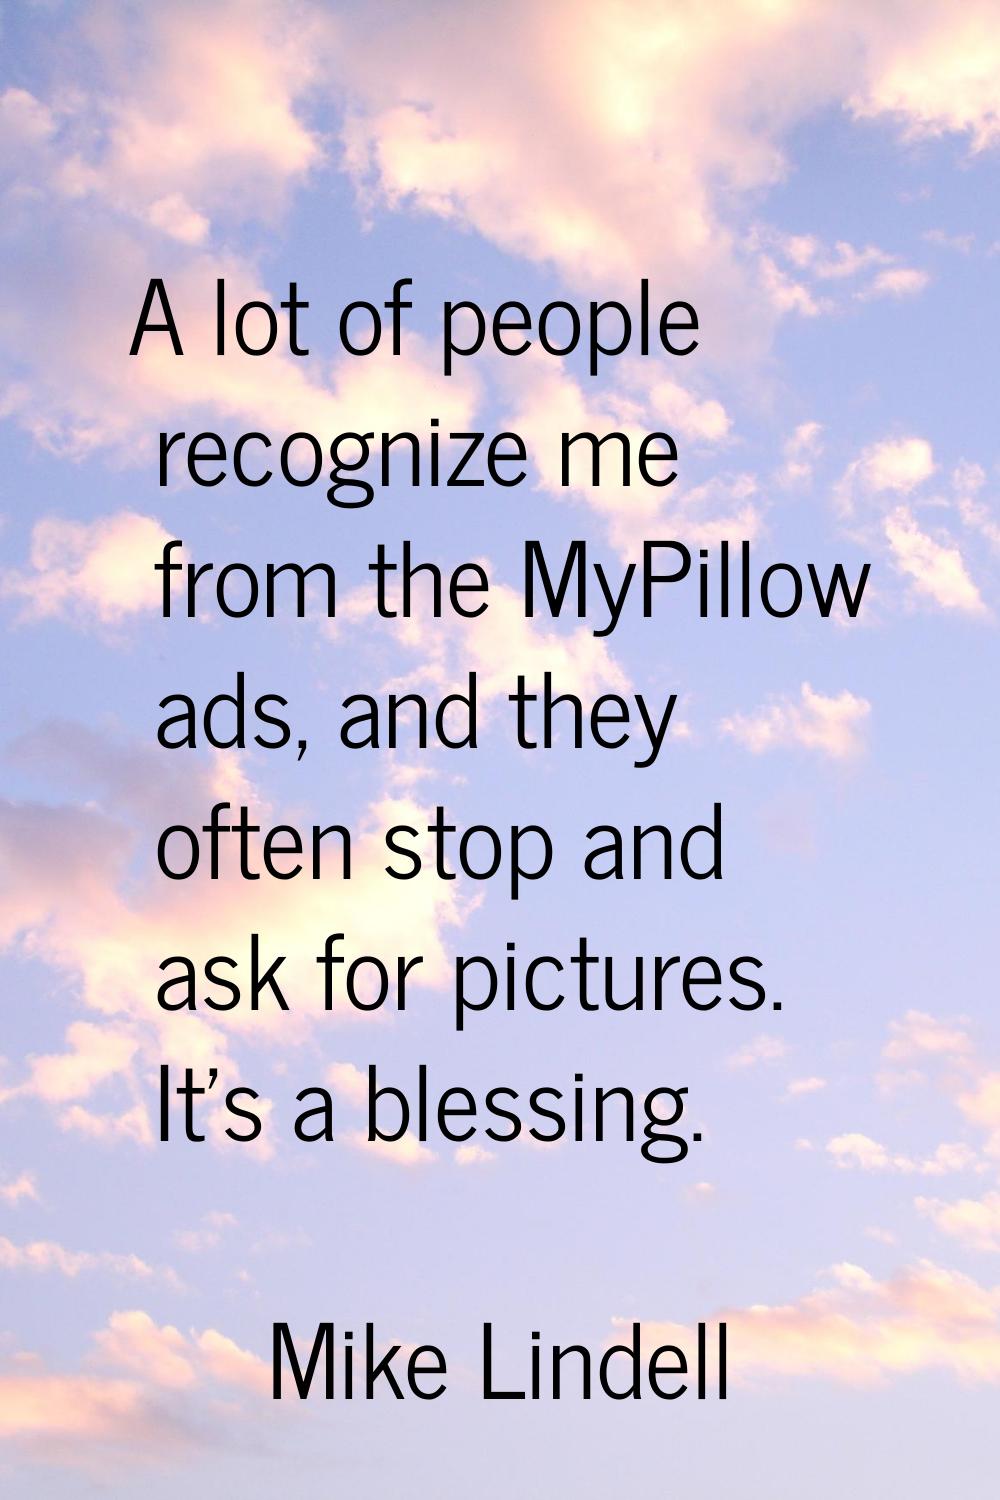 A lot of people recognize me from the MyPillow ads, and they often stop and ask for pictures. It's 